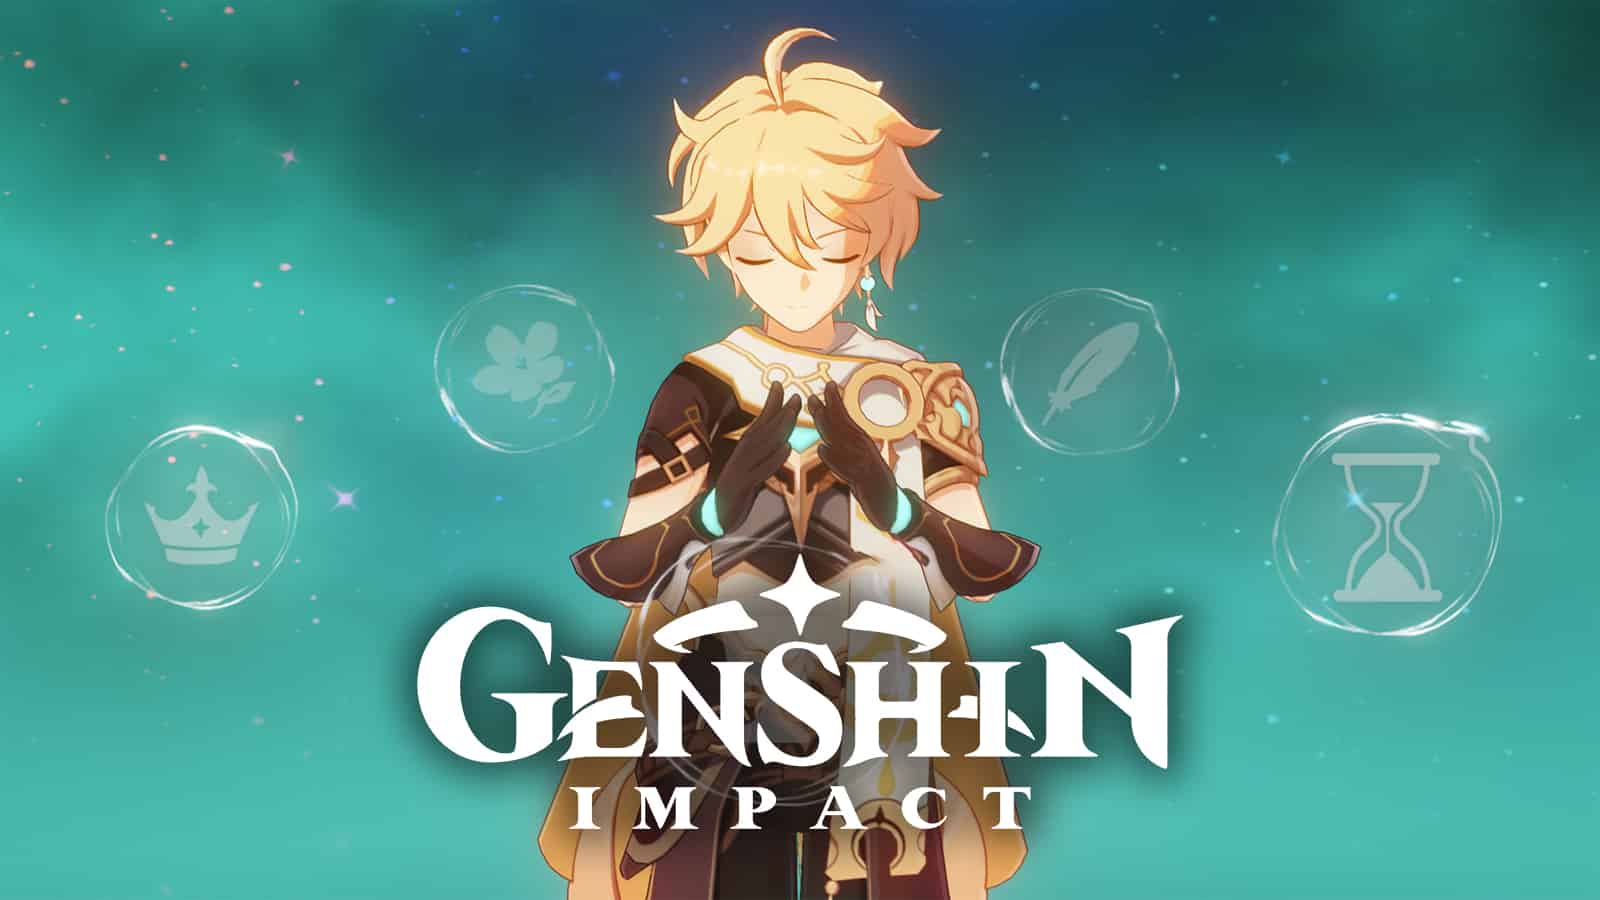 Aether selecting artifacts in Genshin Impact